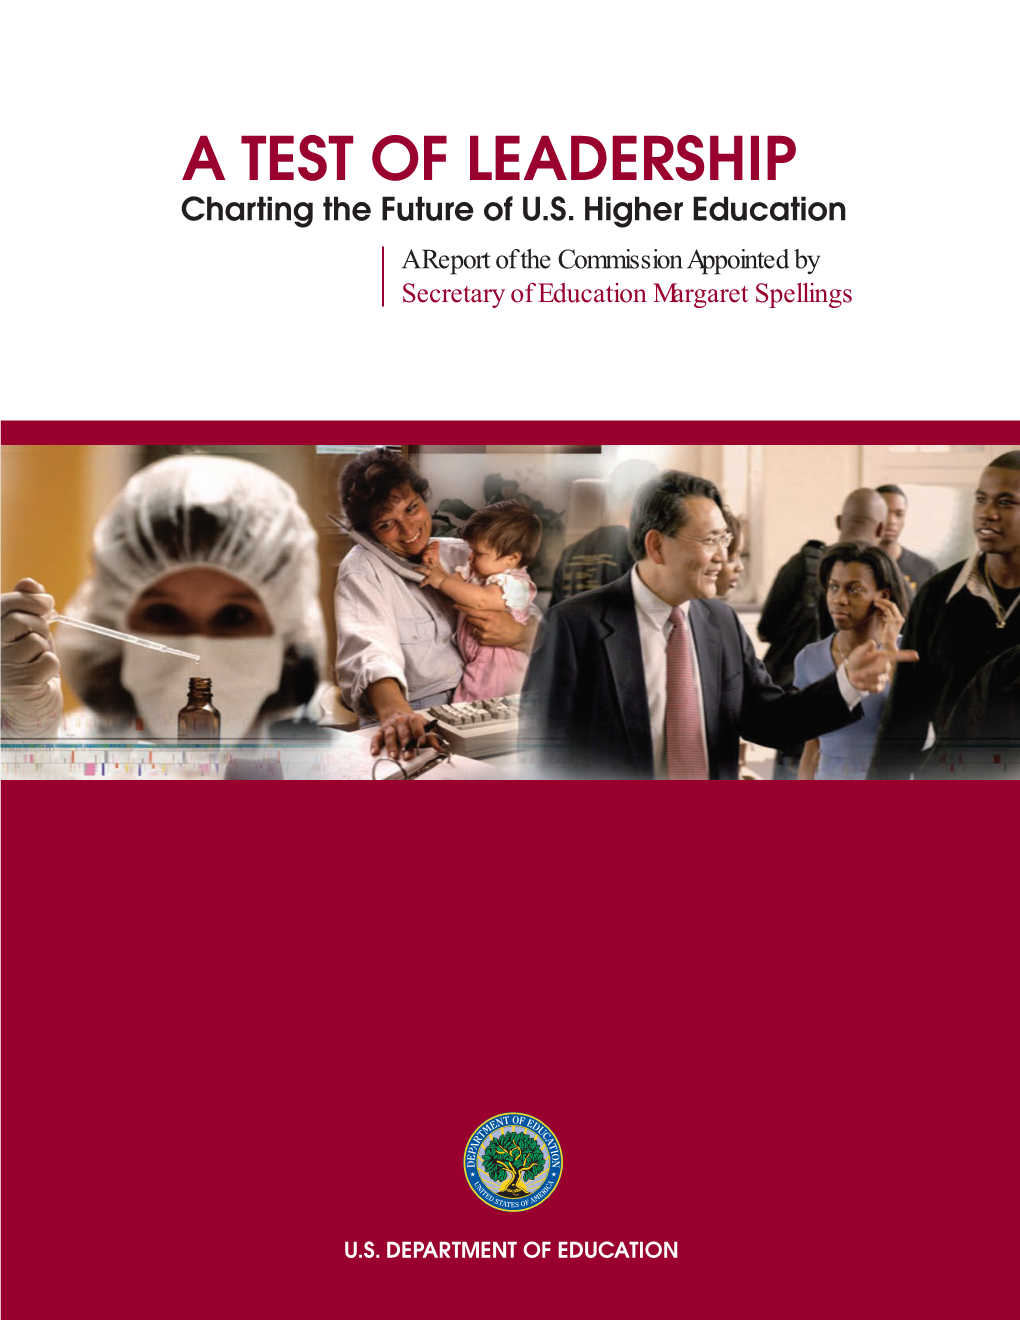 A Test of Leadership: Charting the Future of U.S. Higher Education